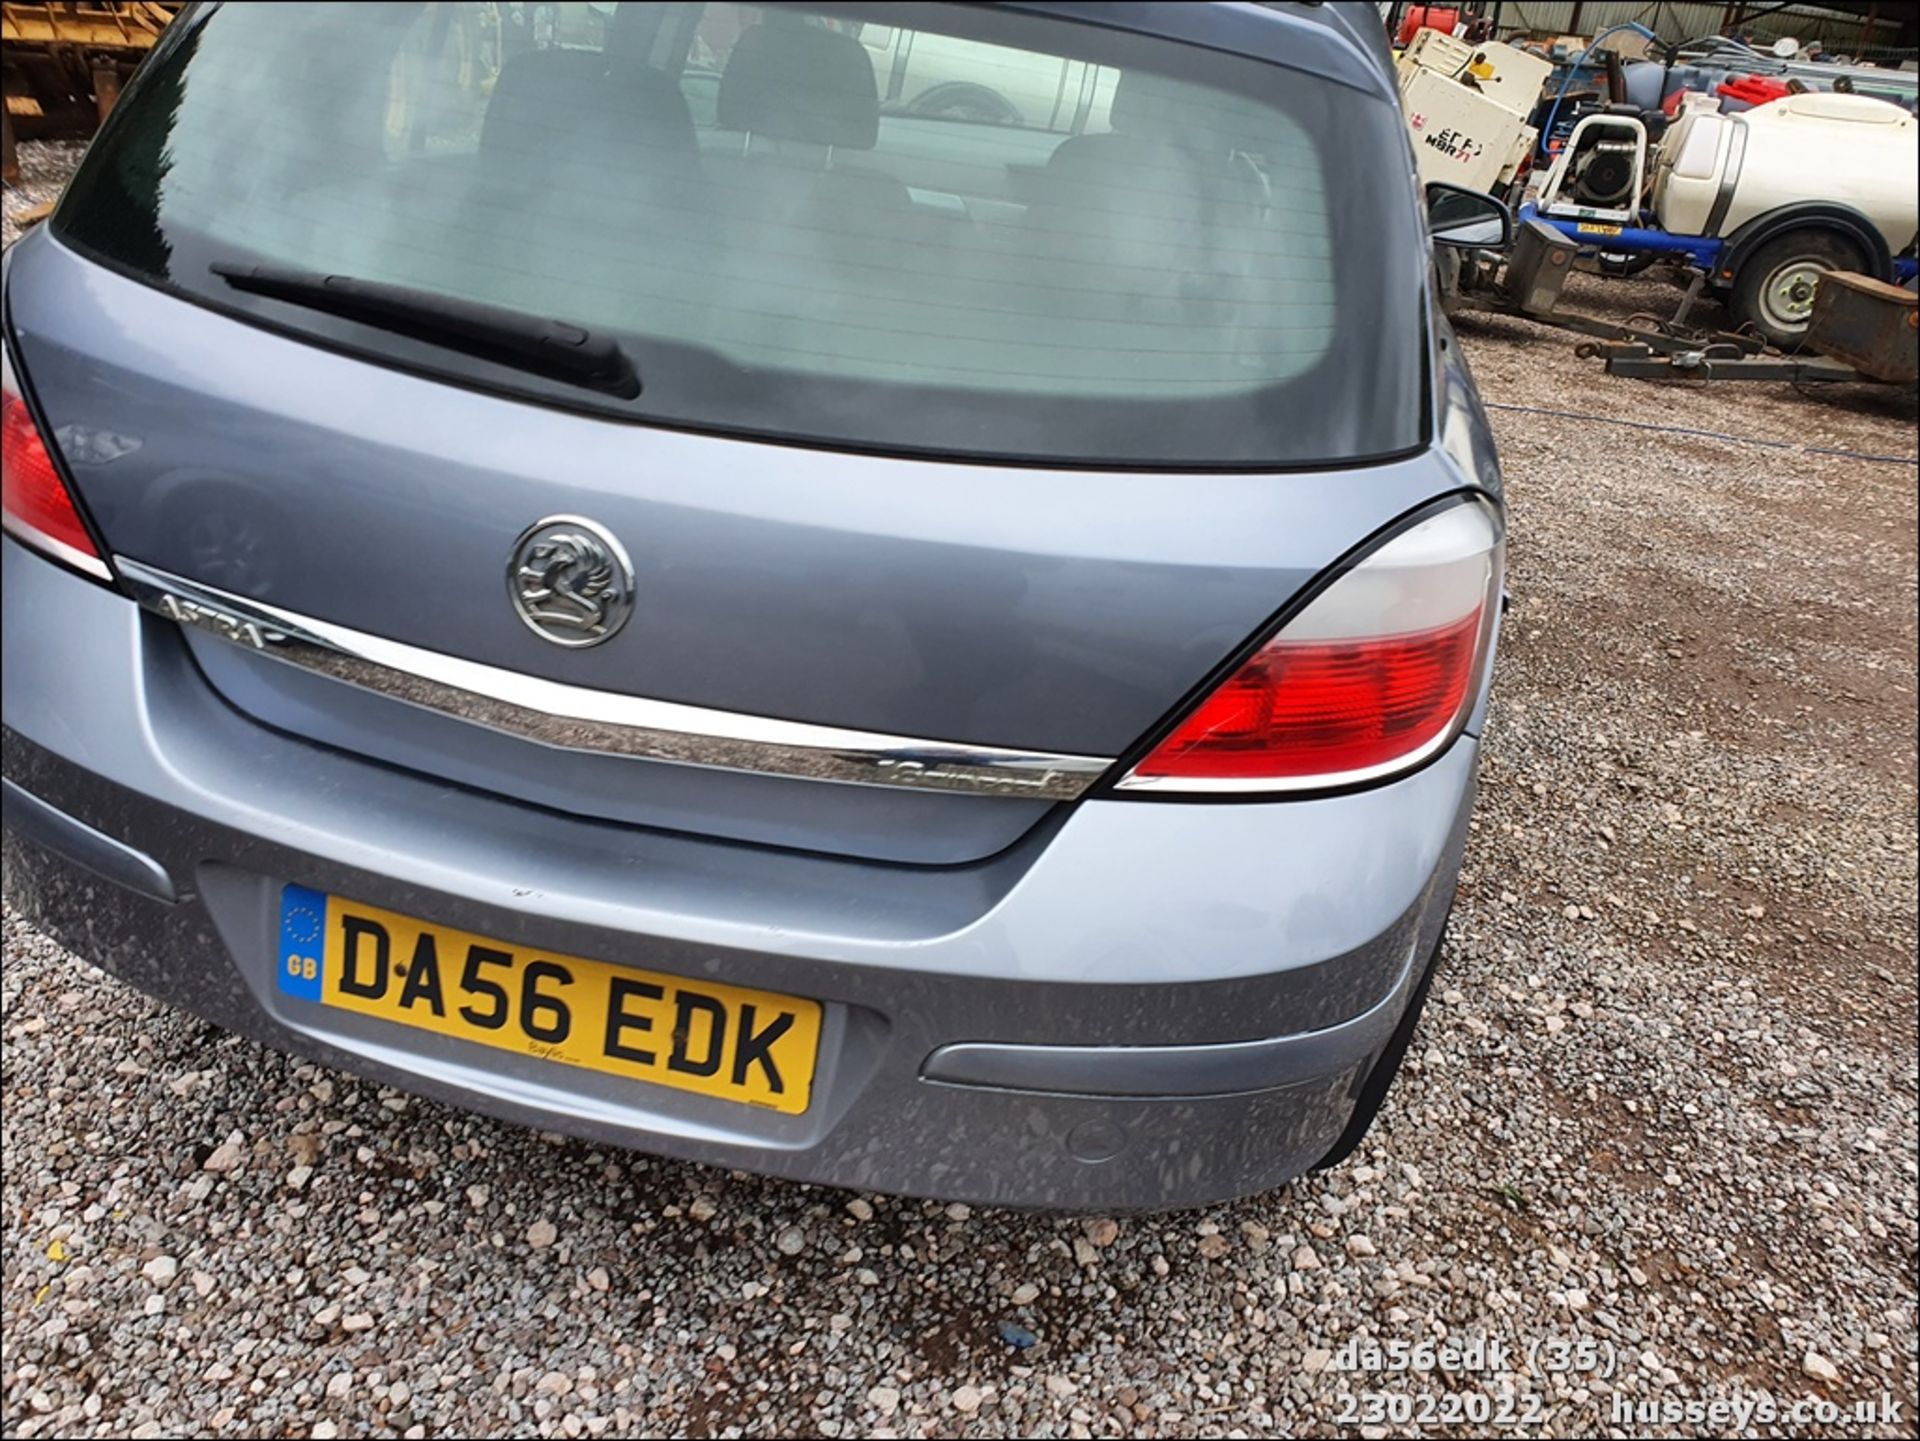 06/56 VAUXHALL ASTRA ACTIVE - 1598cc 5dr Hatchback (Silver) - Image 33 of 42